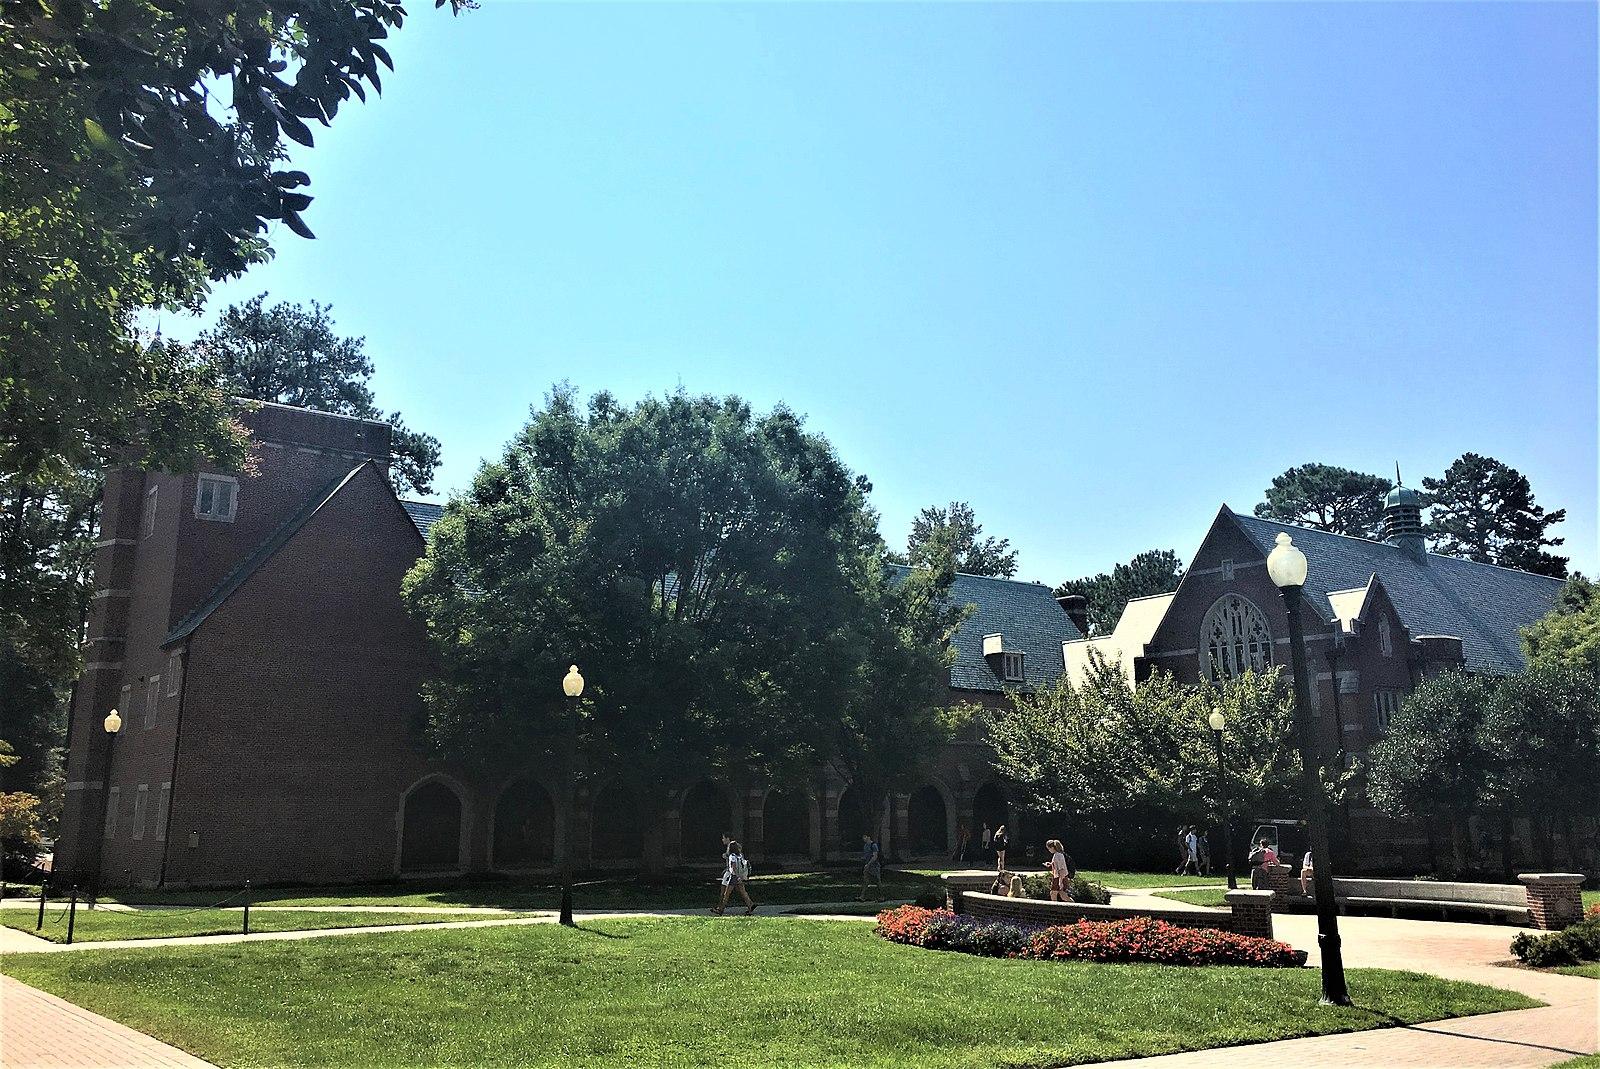 The former Ryland Hall and surrounding area in the University of Richmond